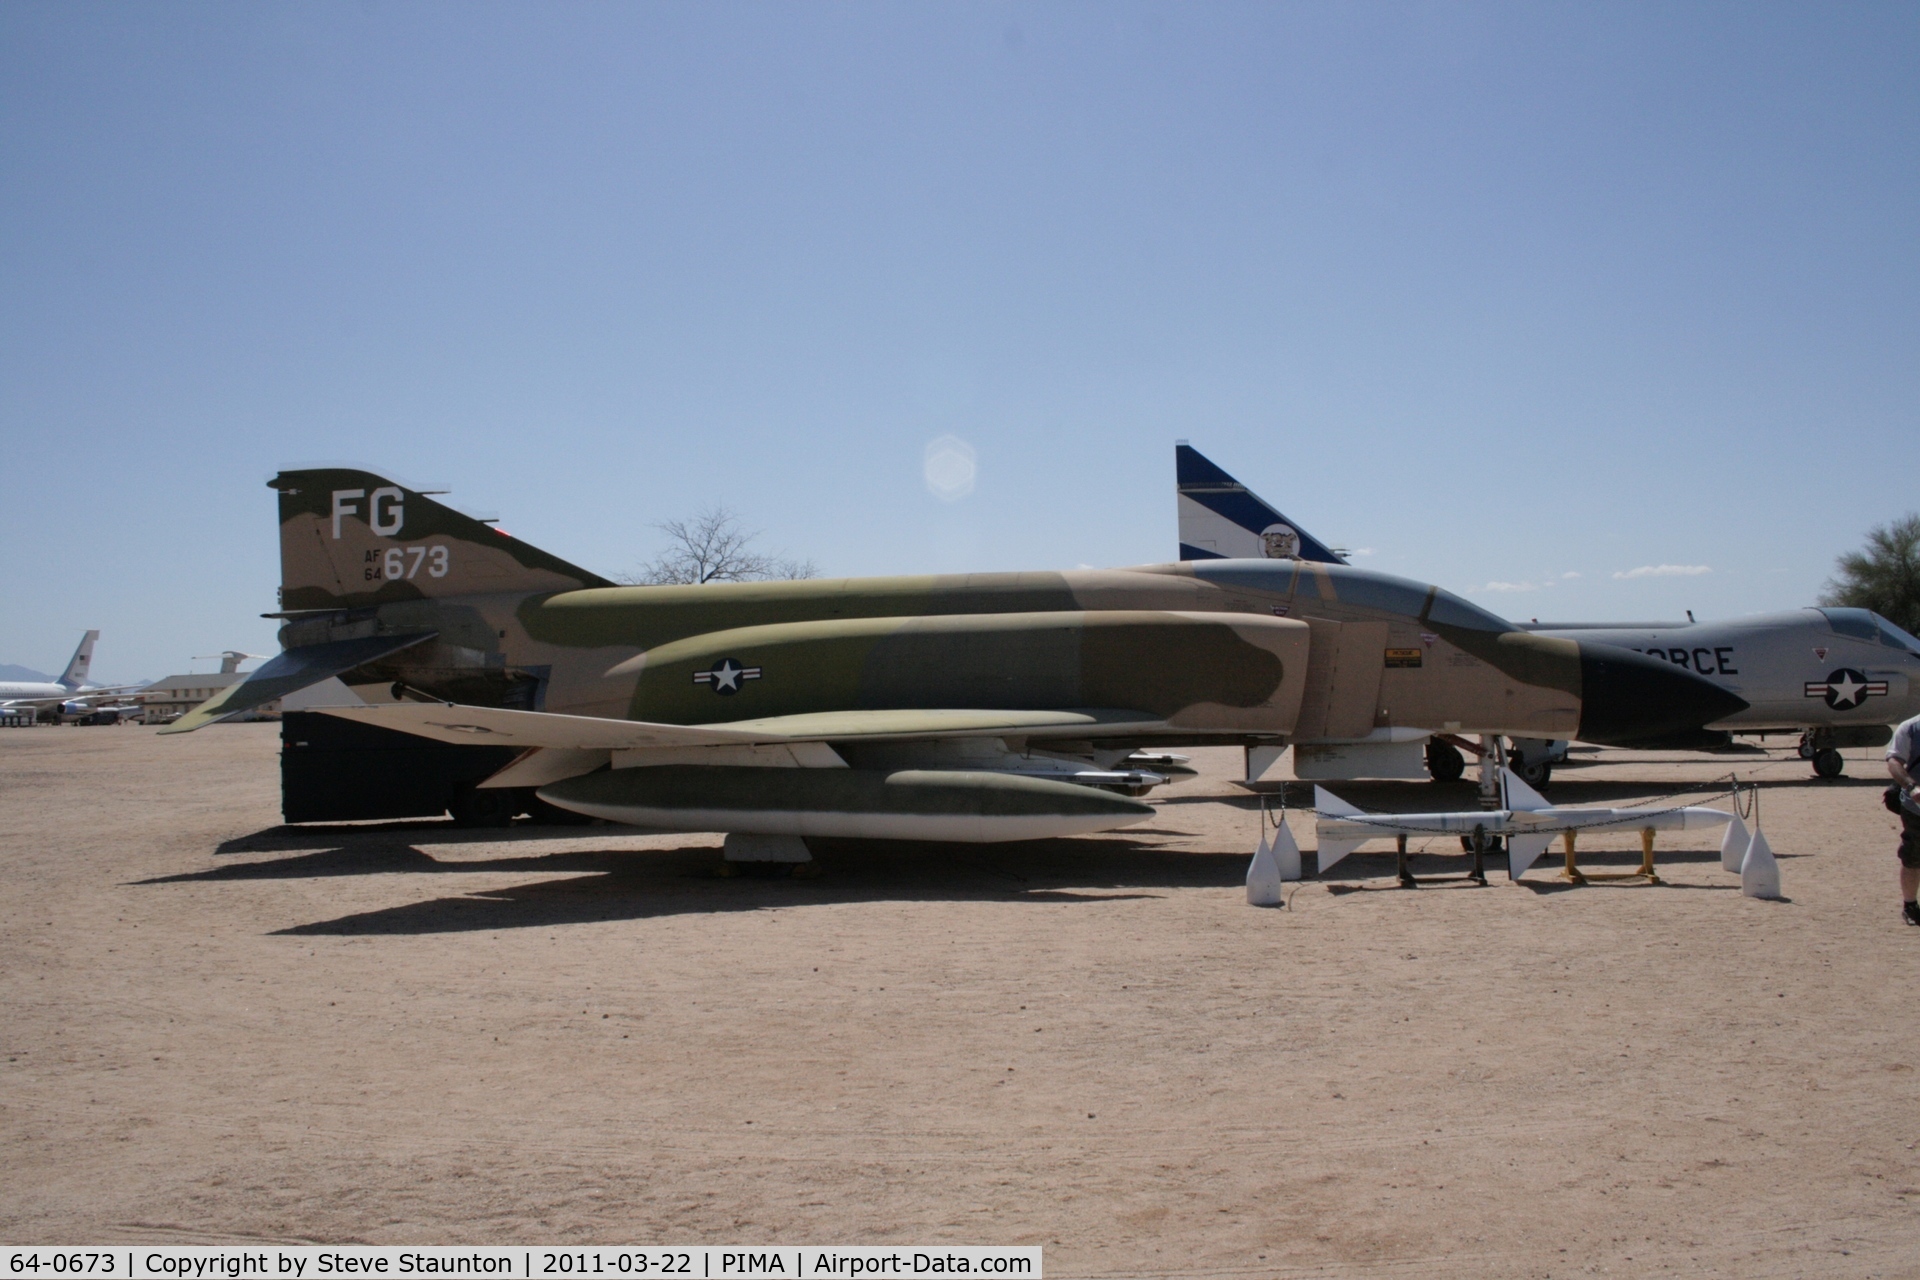 64-0673, 1964 McDonnell F-4C-22-MC Phantom II C/N 898, Taken at Pima Air and Space Museum, in March 2011 whilst on an Aeroprint Aviation tour